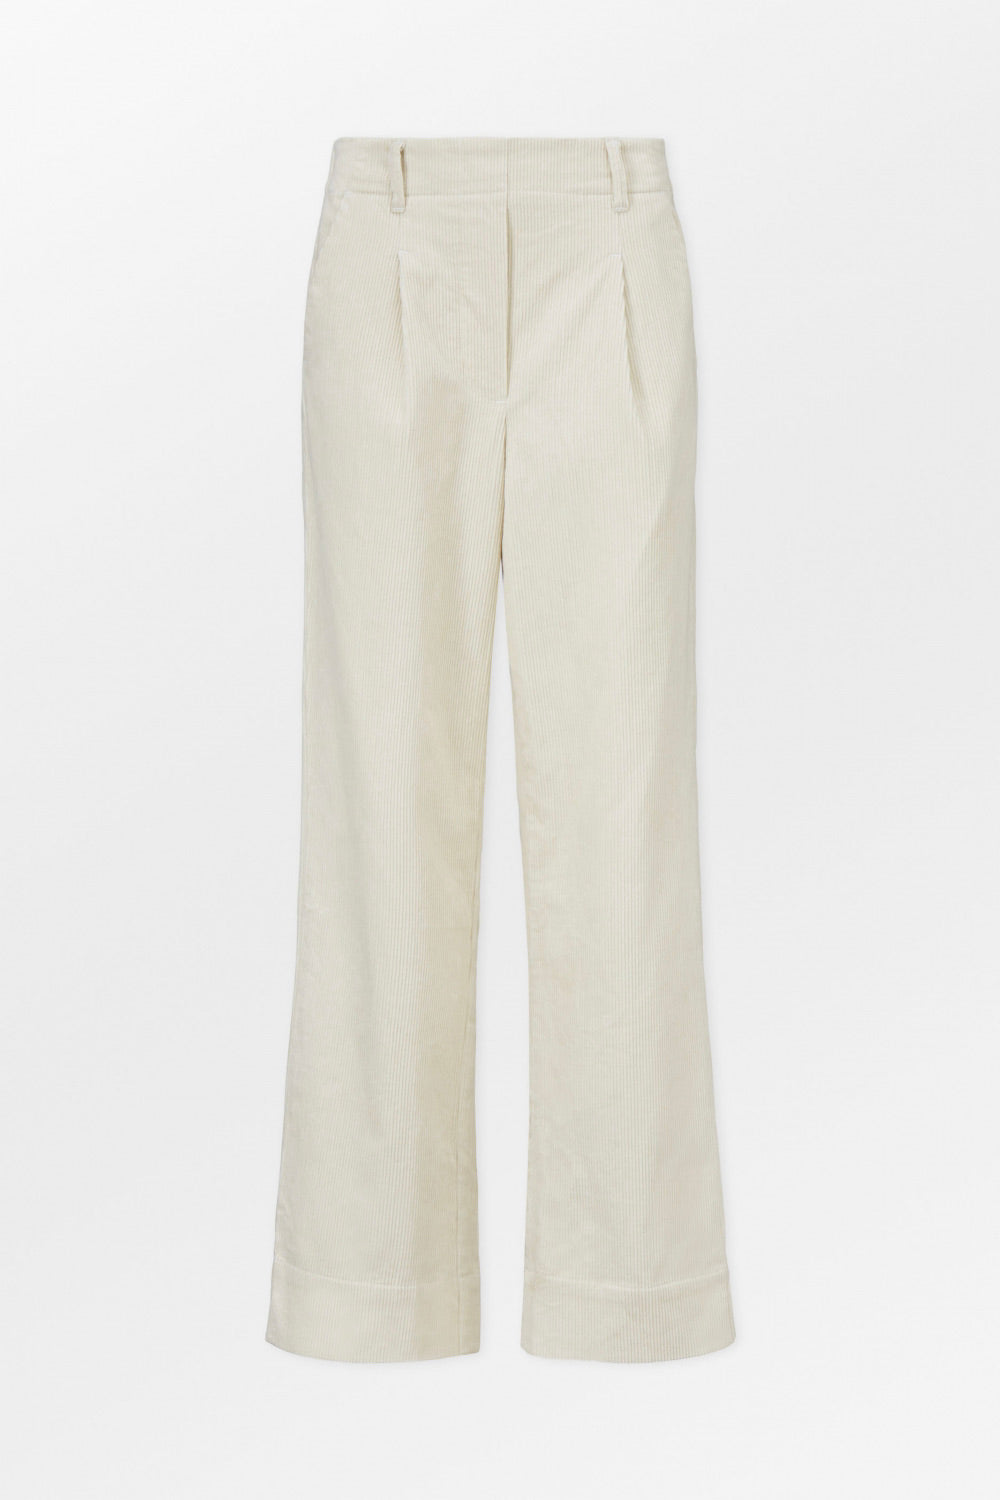 AIAYU - BILLY PANT CORDUROY - Dale